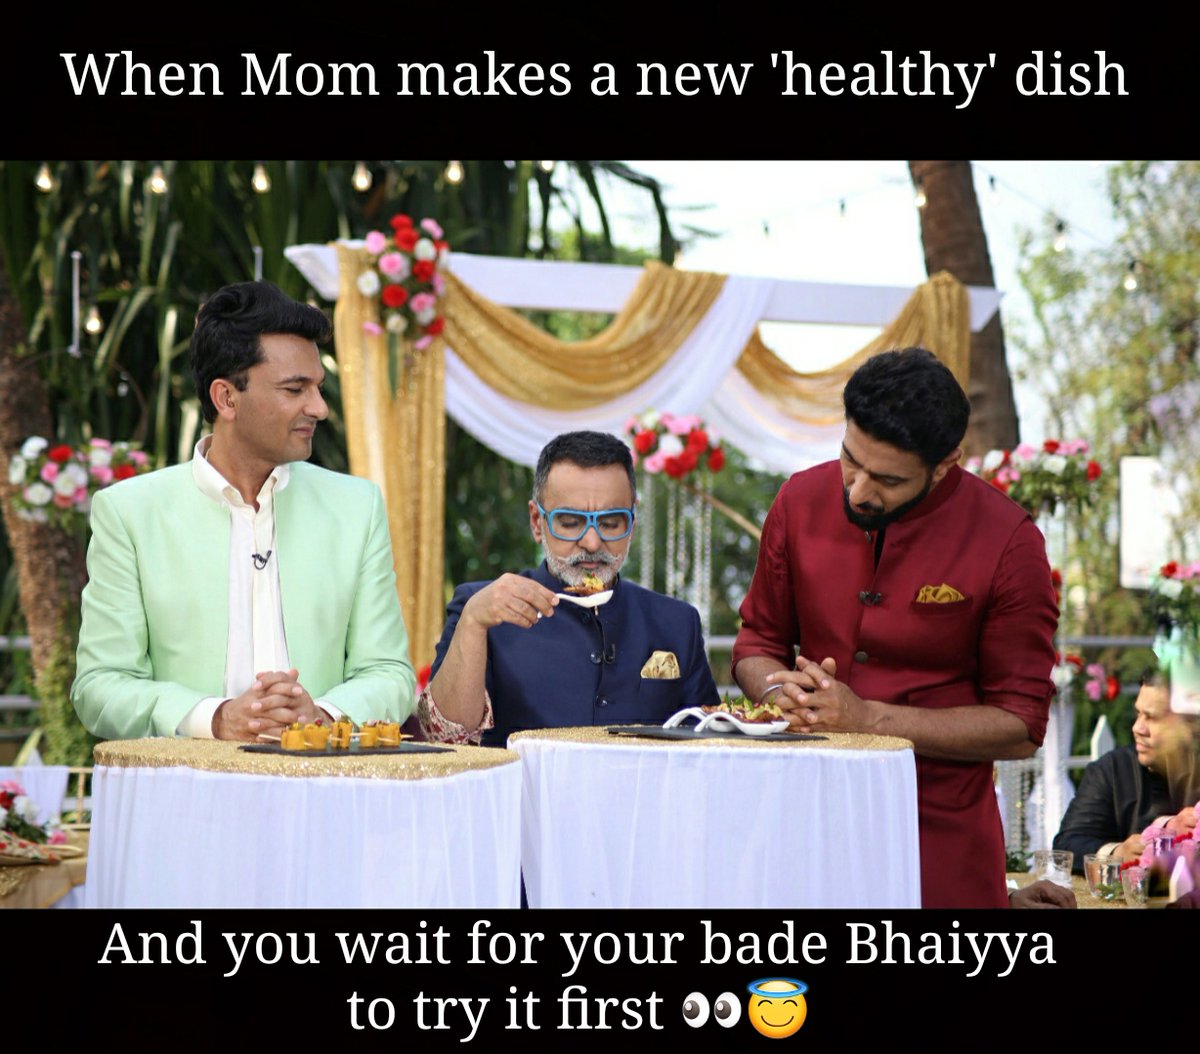 Tag that one sibling. 

@TheVikasKhanna  @TheVineetBhatia 

#healthydish #siblings #brothers #chefs #meme #fun #funny #funnymeme #RanveerBrar #VikasKhanna #VineetBhatia #chef #cheflife #masterchef #ChefsofIndia #IndianChefs